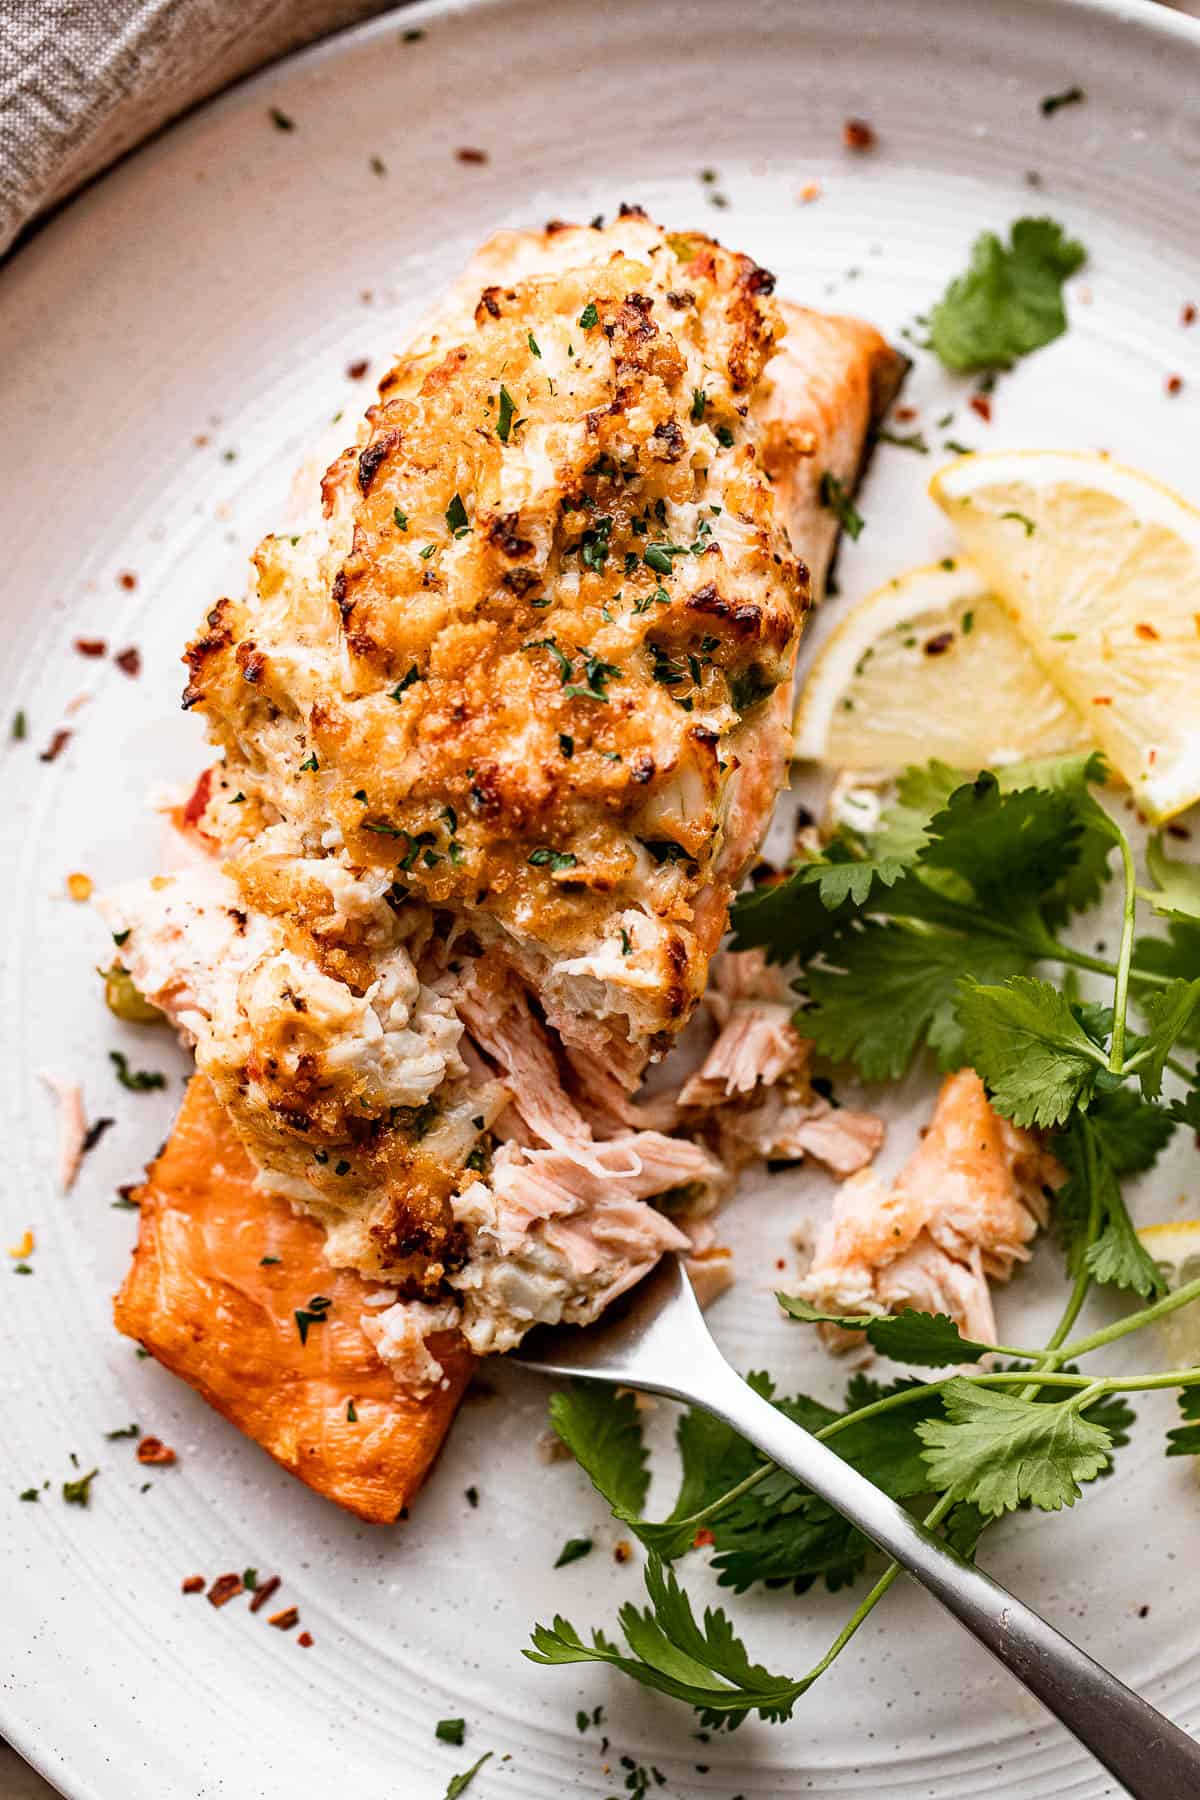 crab stuffed salmon fillet served on a white plate with greens and lemon slices arranged around it.